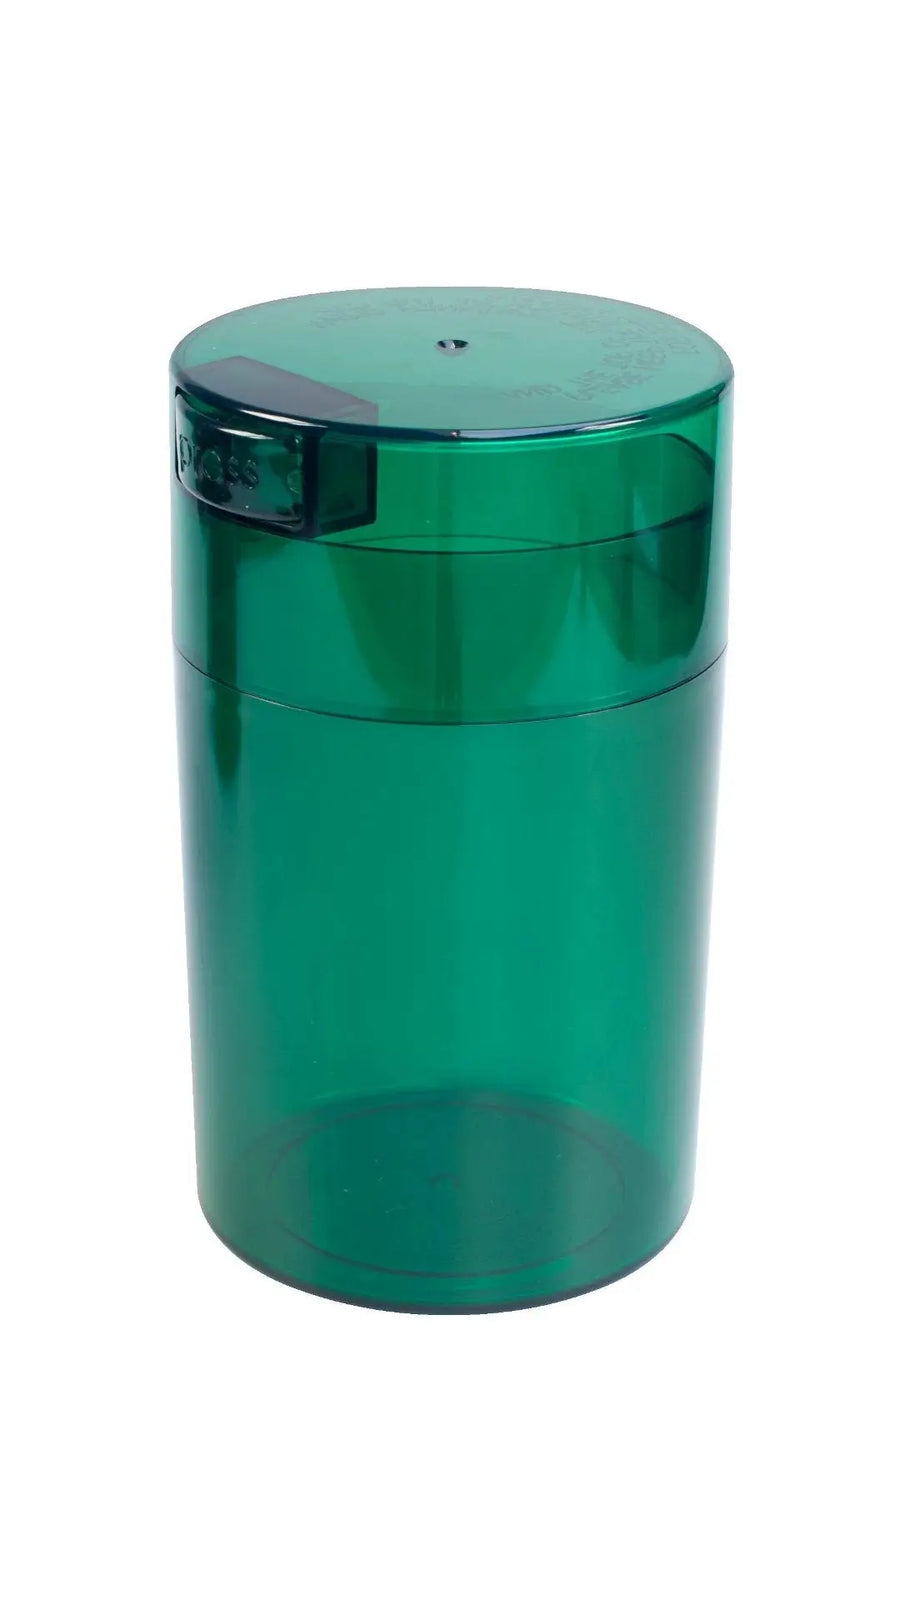 Tightvac 0,57 liter / 150g / Clear / Green Tint - TightVac Europe - The eassiest storage solutions